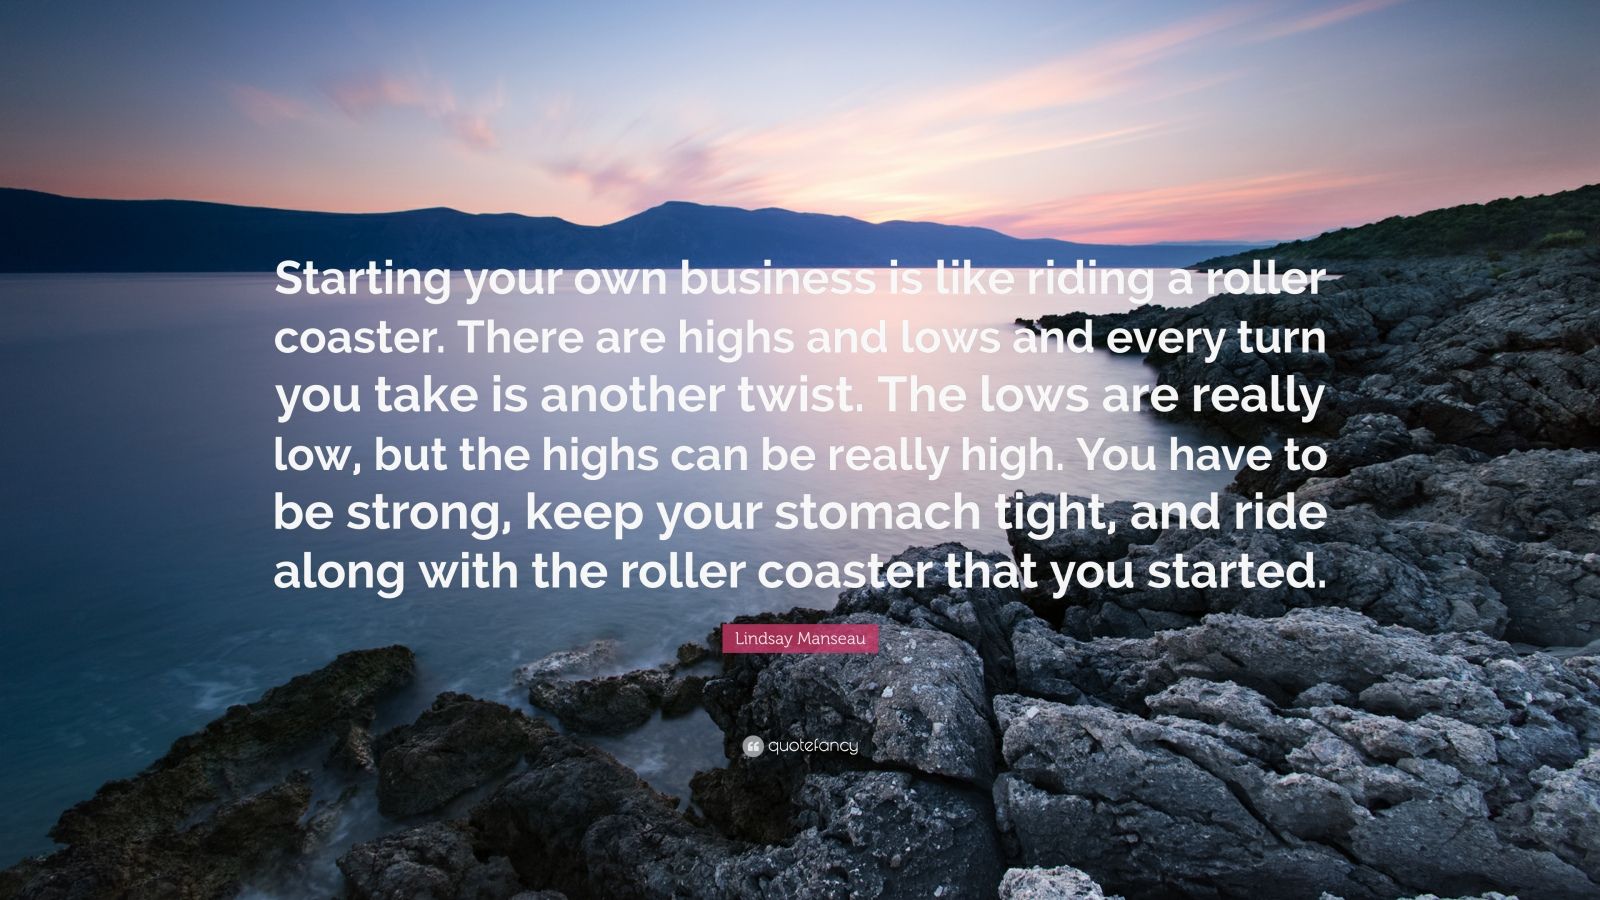 Lindsay Manseau Quote: “Starting your own business is like riding a